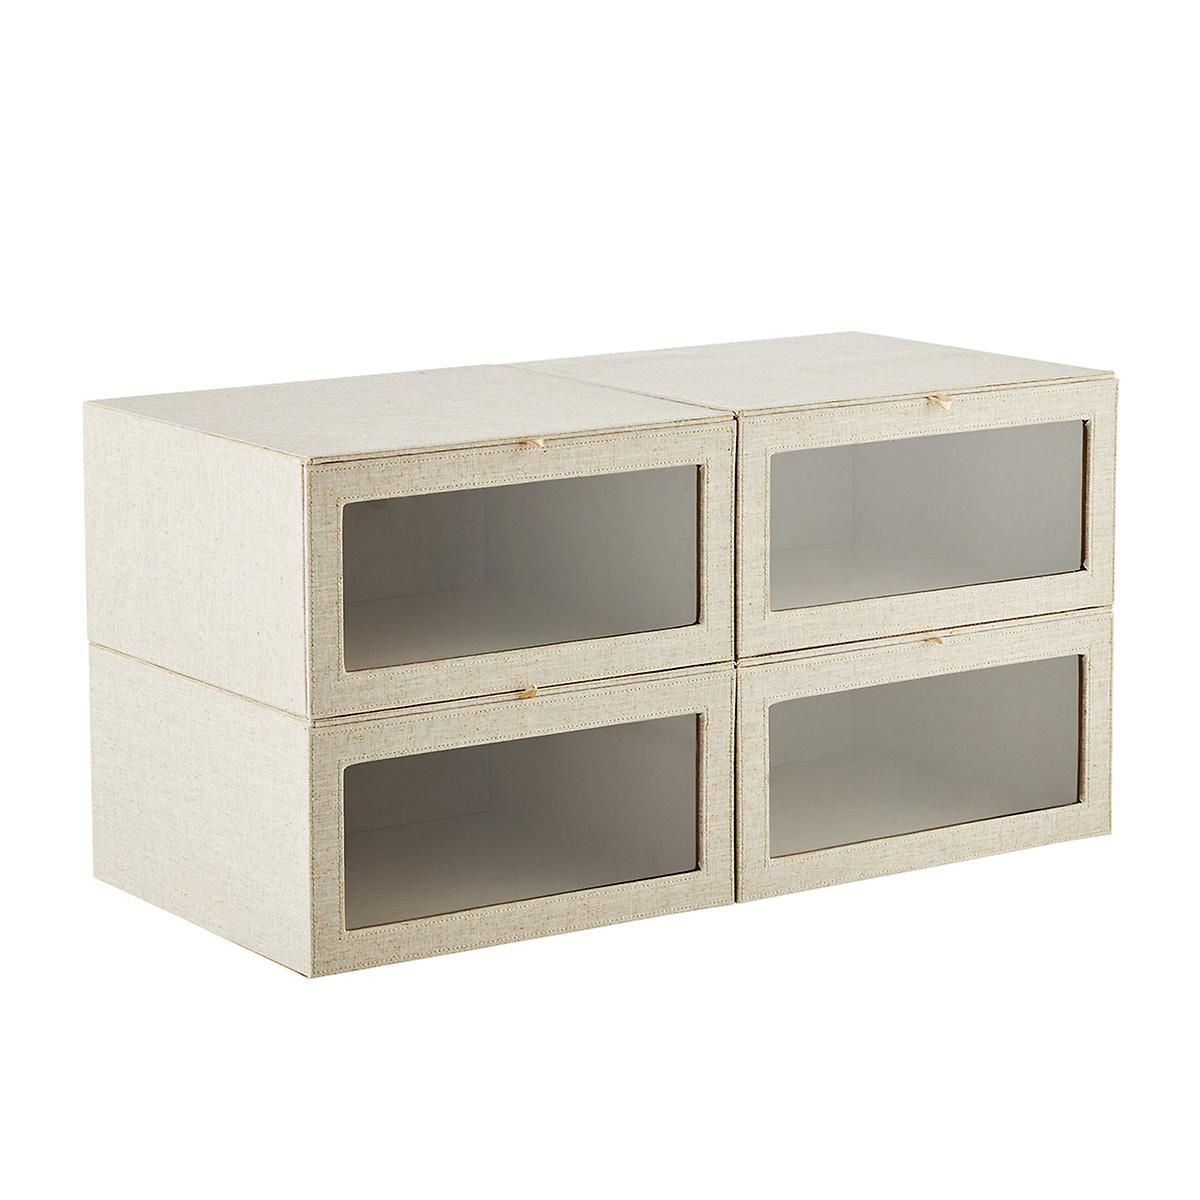 Linen Cambridge Drop-Front Sweater Box | The Container Store